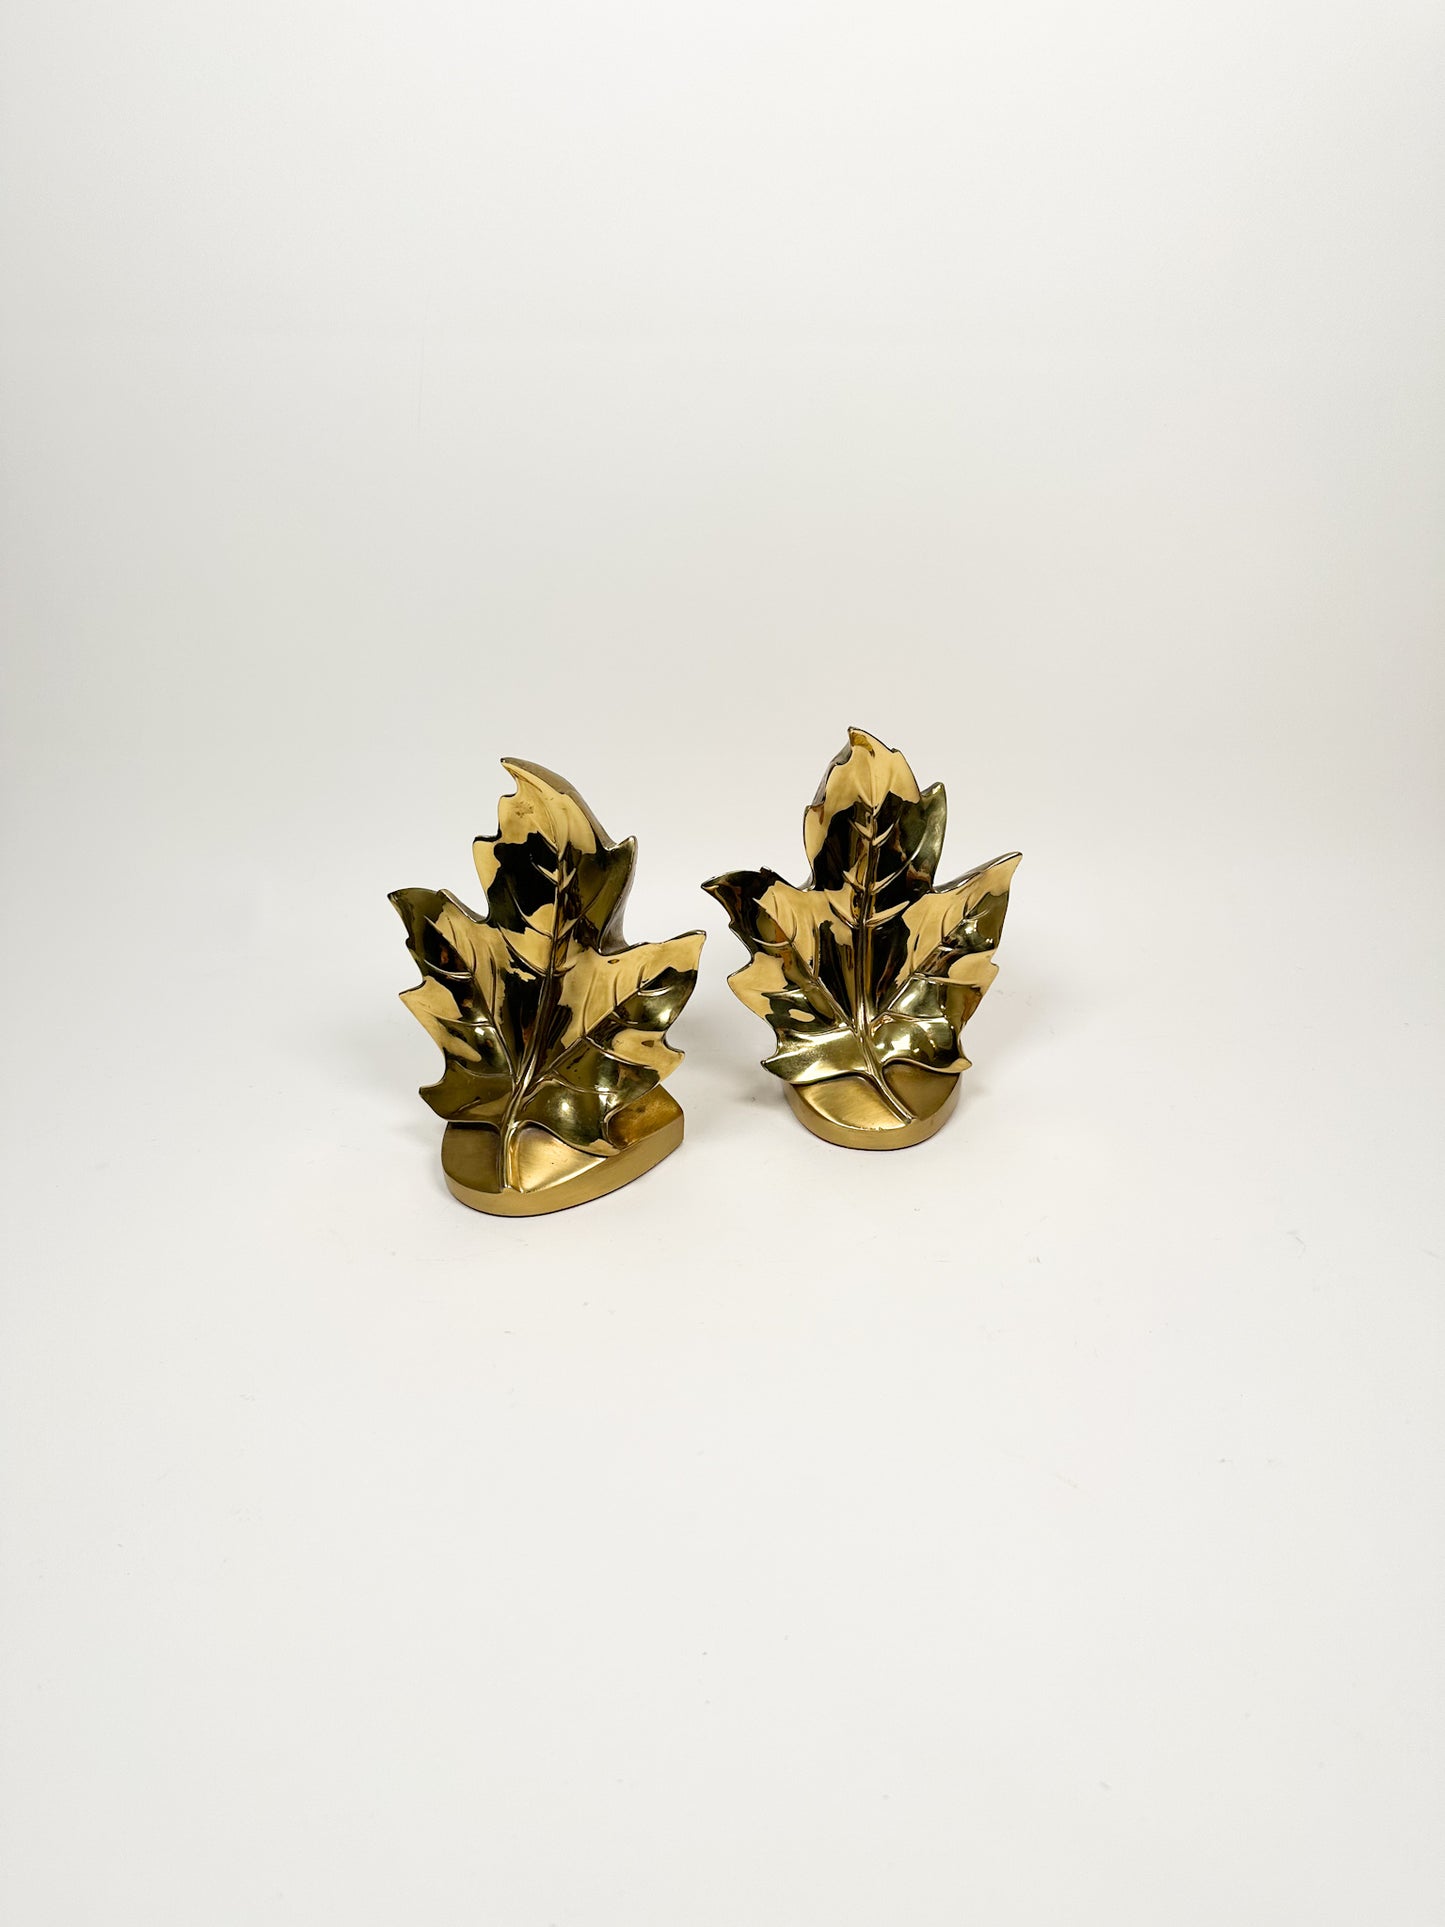 Brass Maple Leaf Bookends